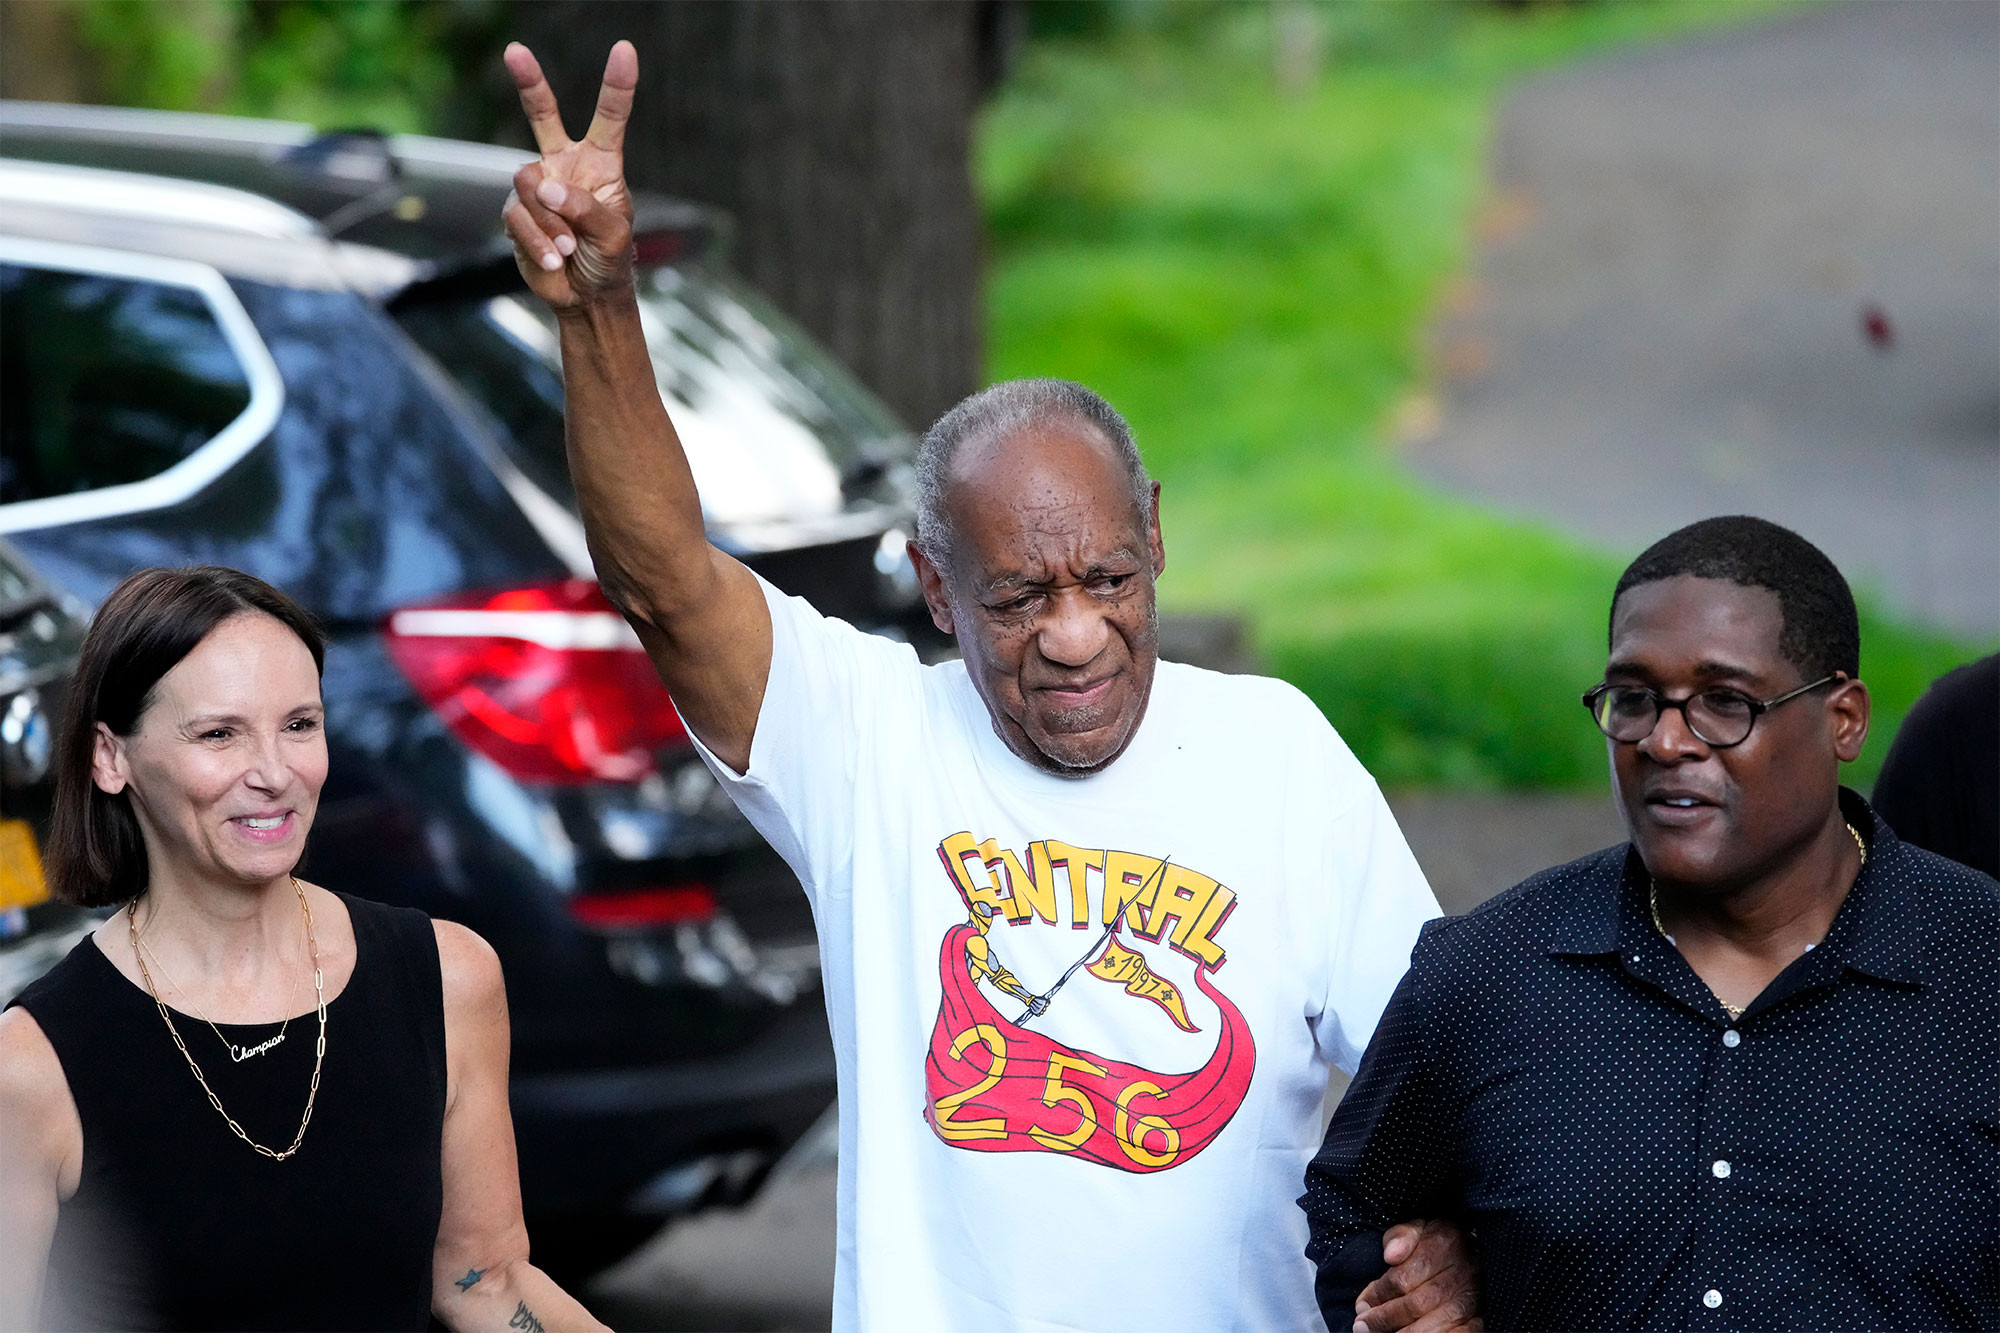 Bill Cosby out of jail says he's innocent